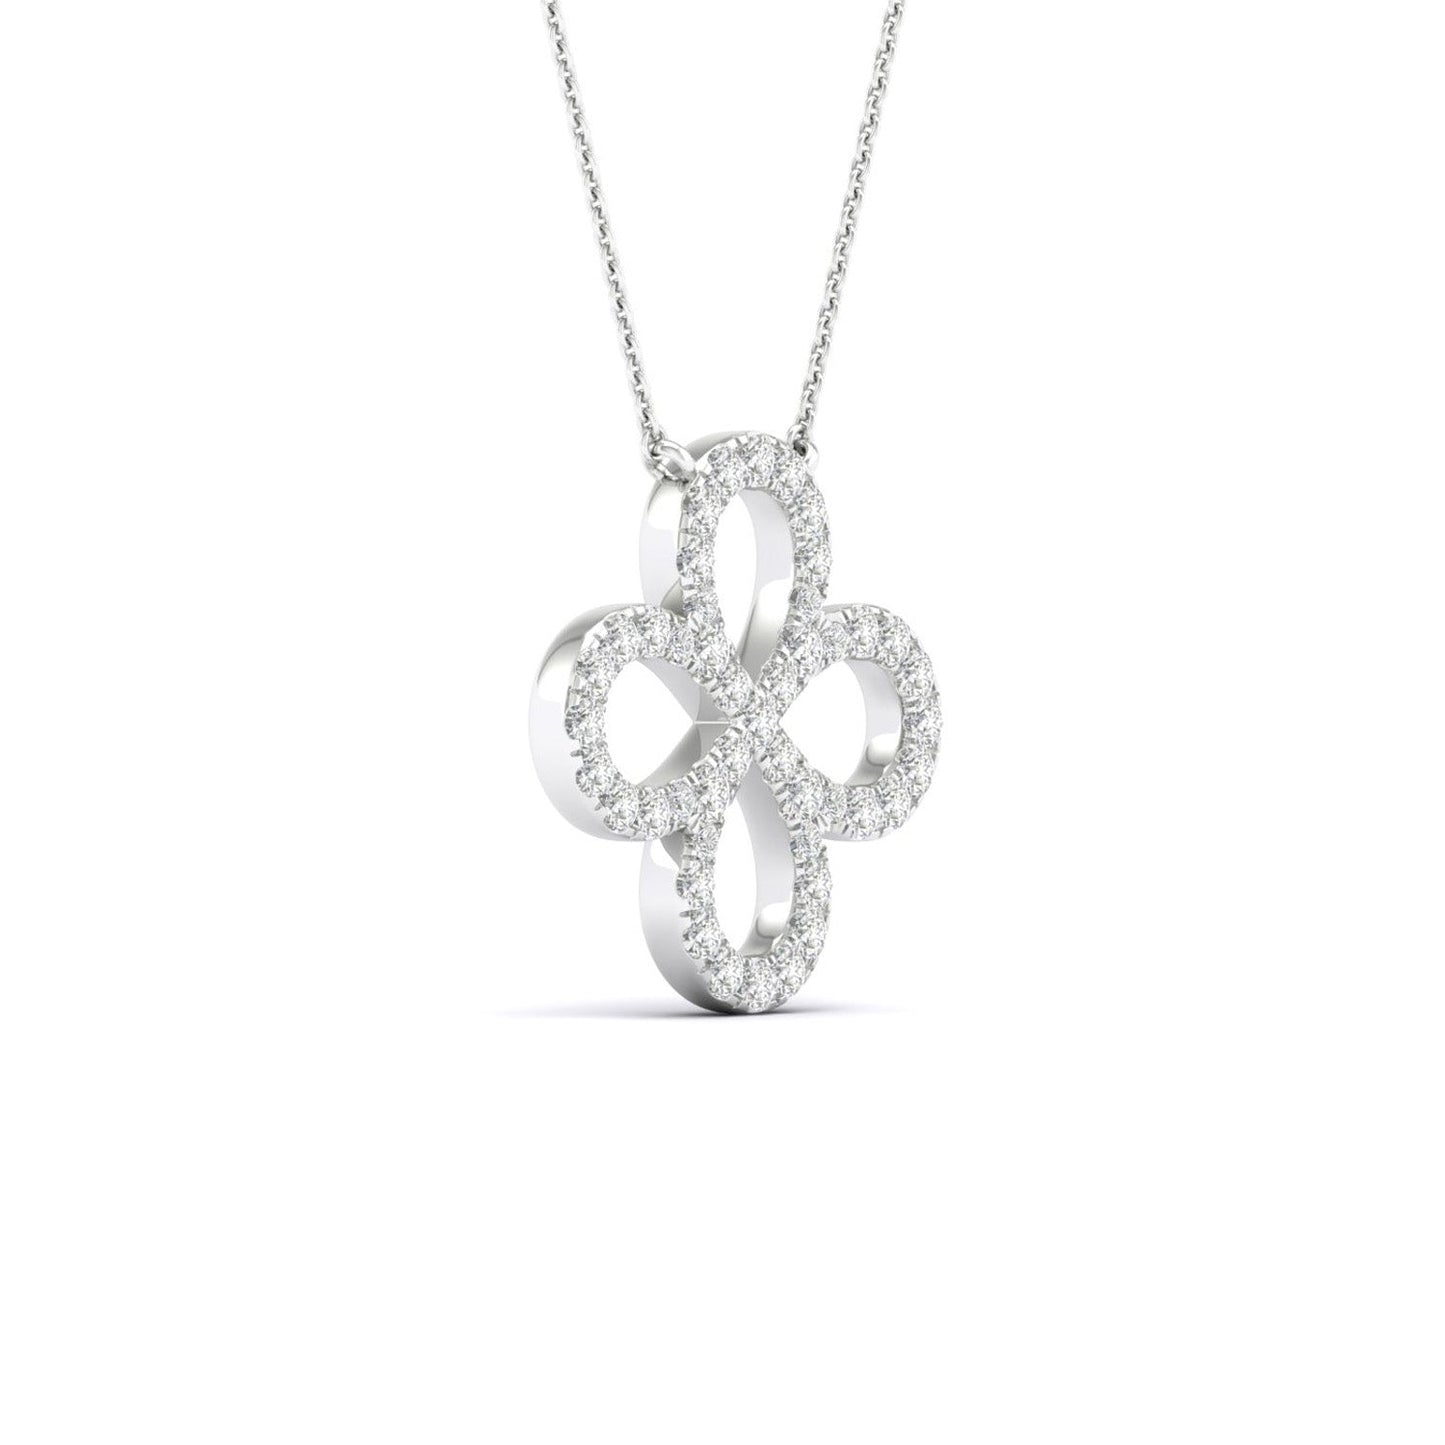 Infinity-Clover Silhouette Necklace_Product Angle_1/4 - 2